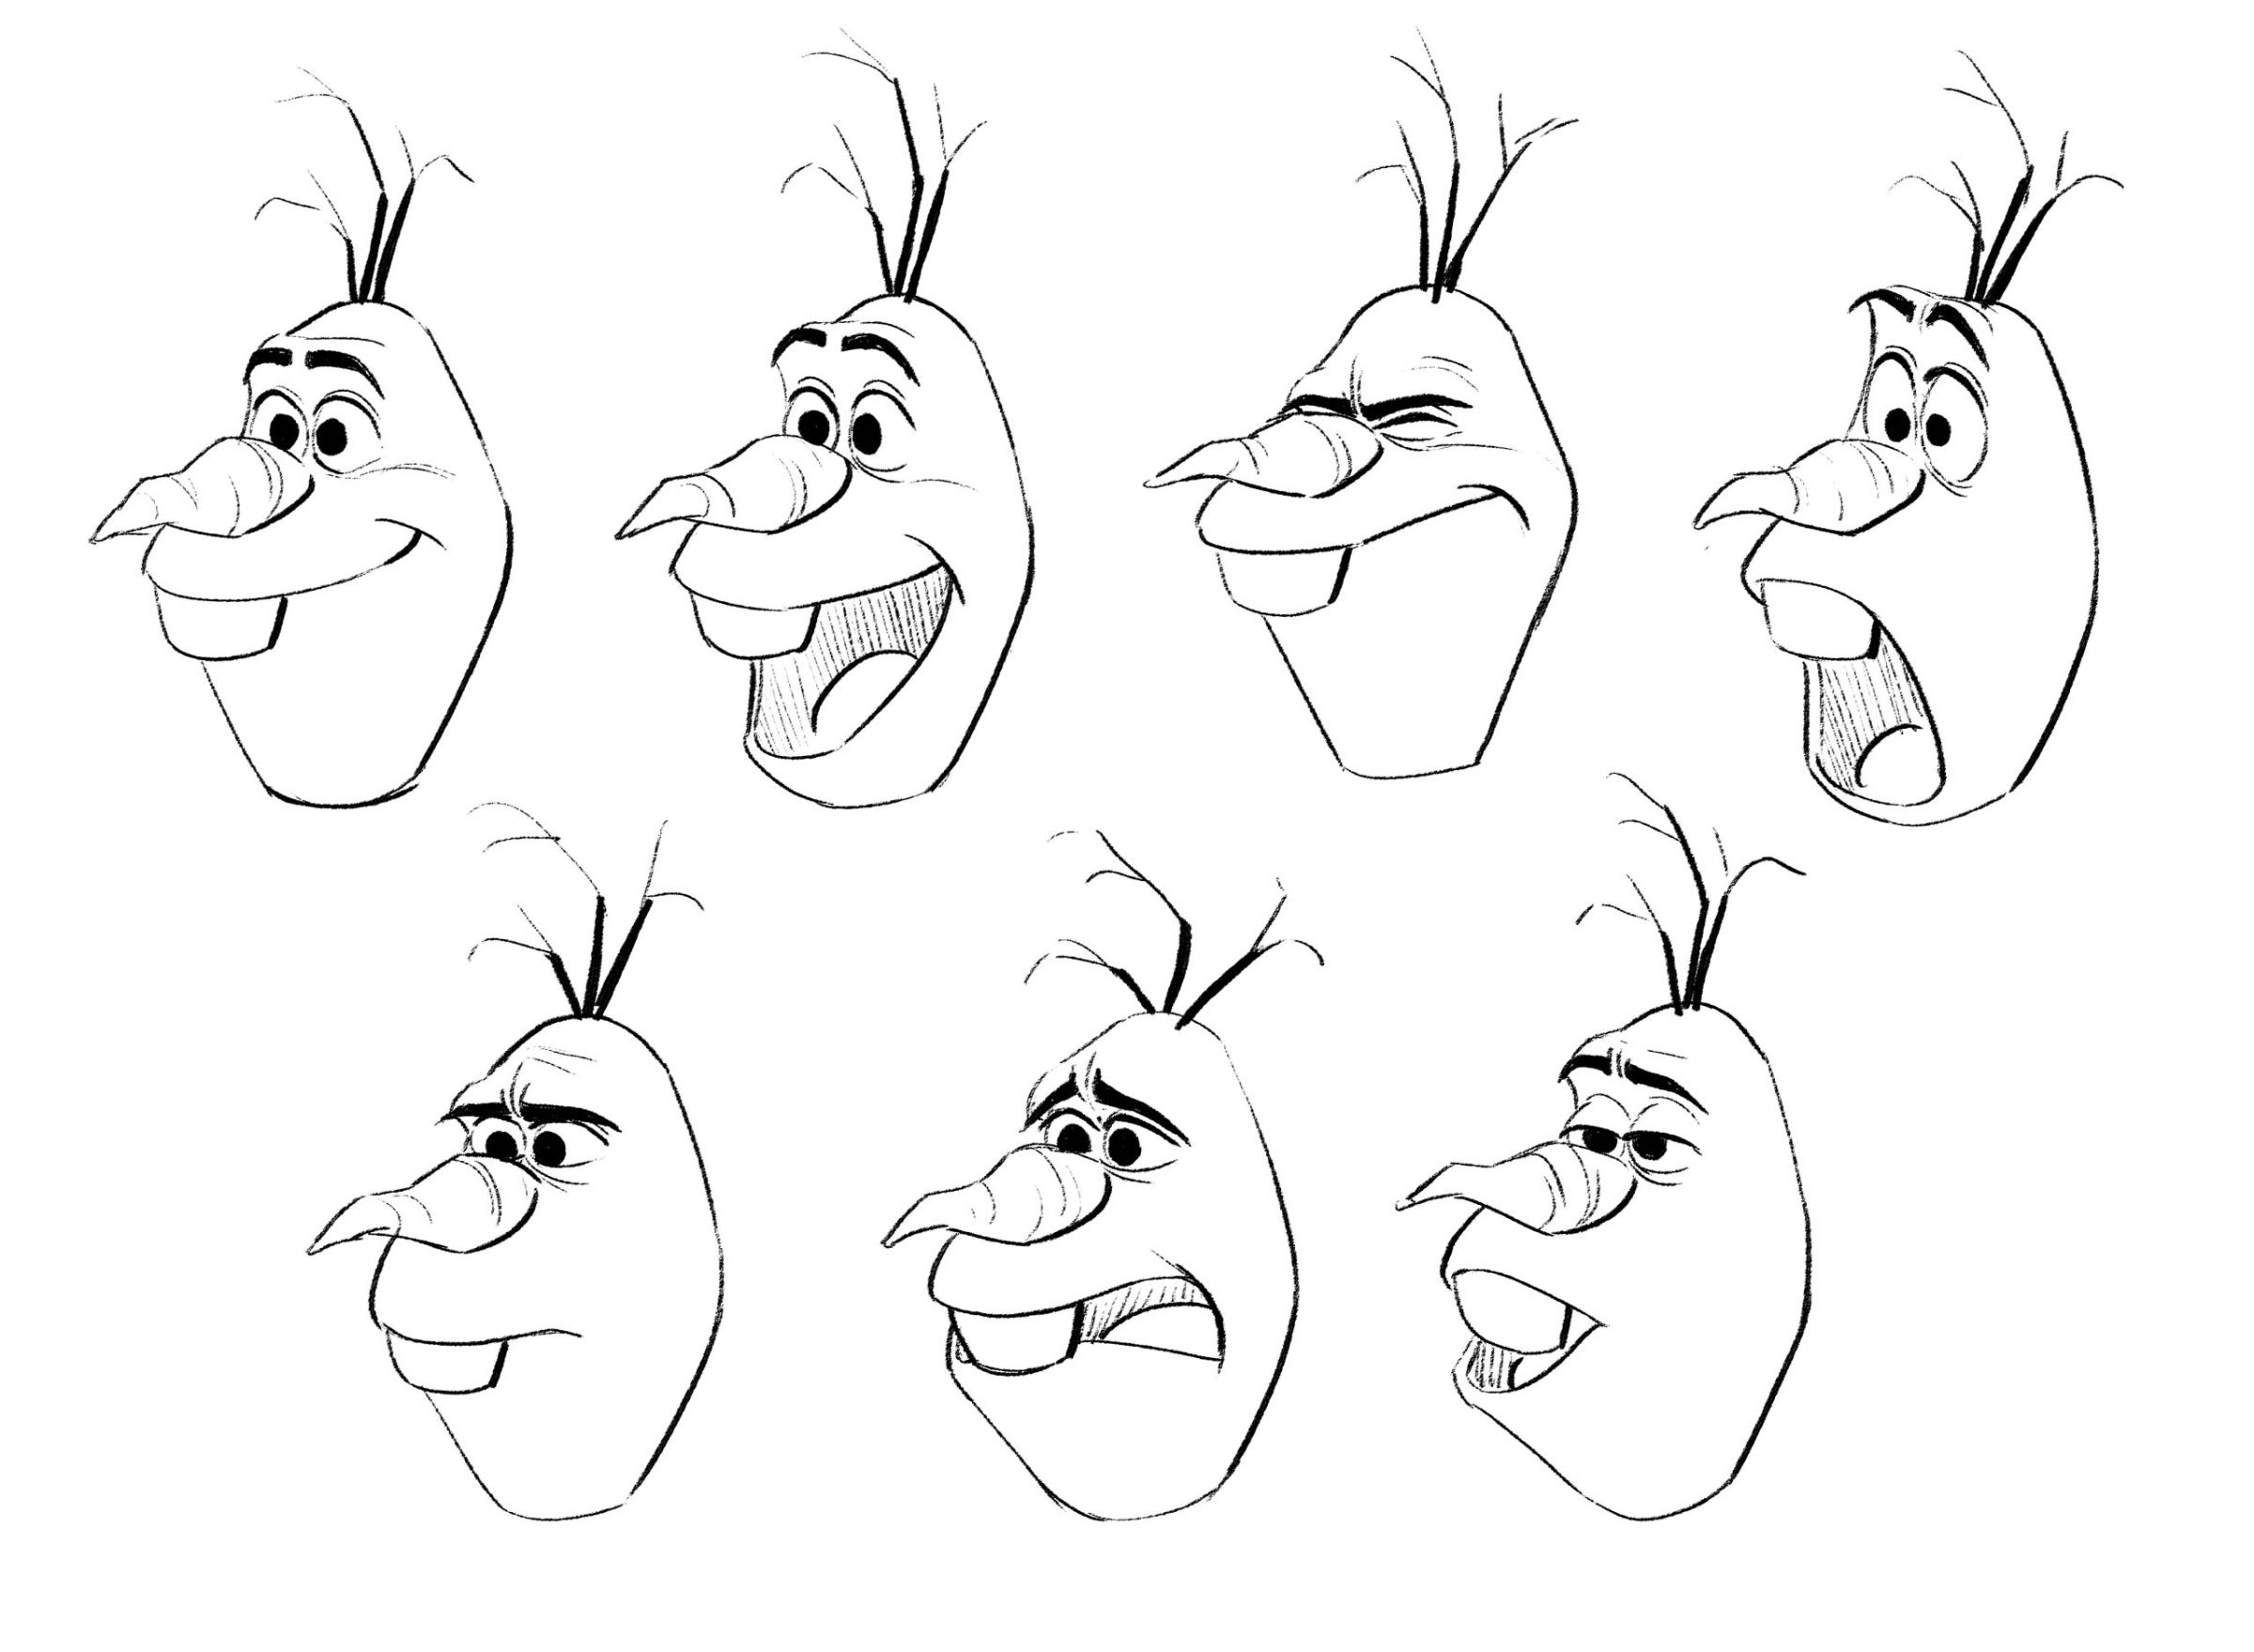 "FROZEN" Olaf model sheet. ©2013 Disney. All Rights Reserved.